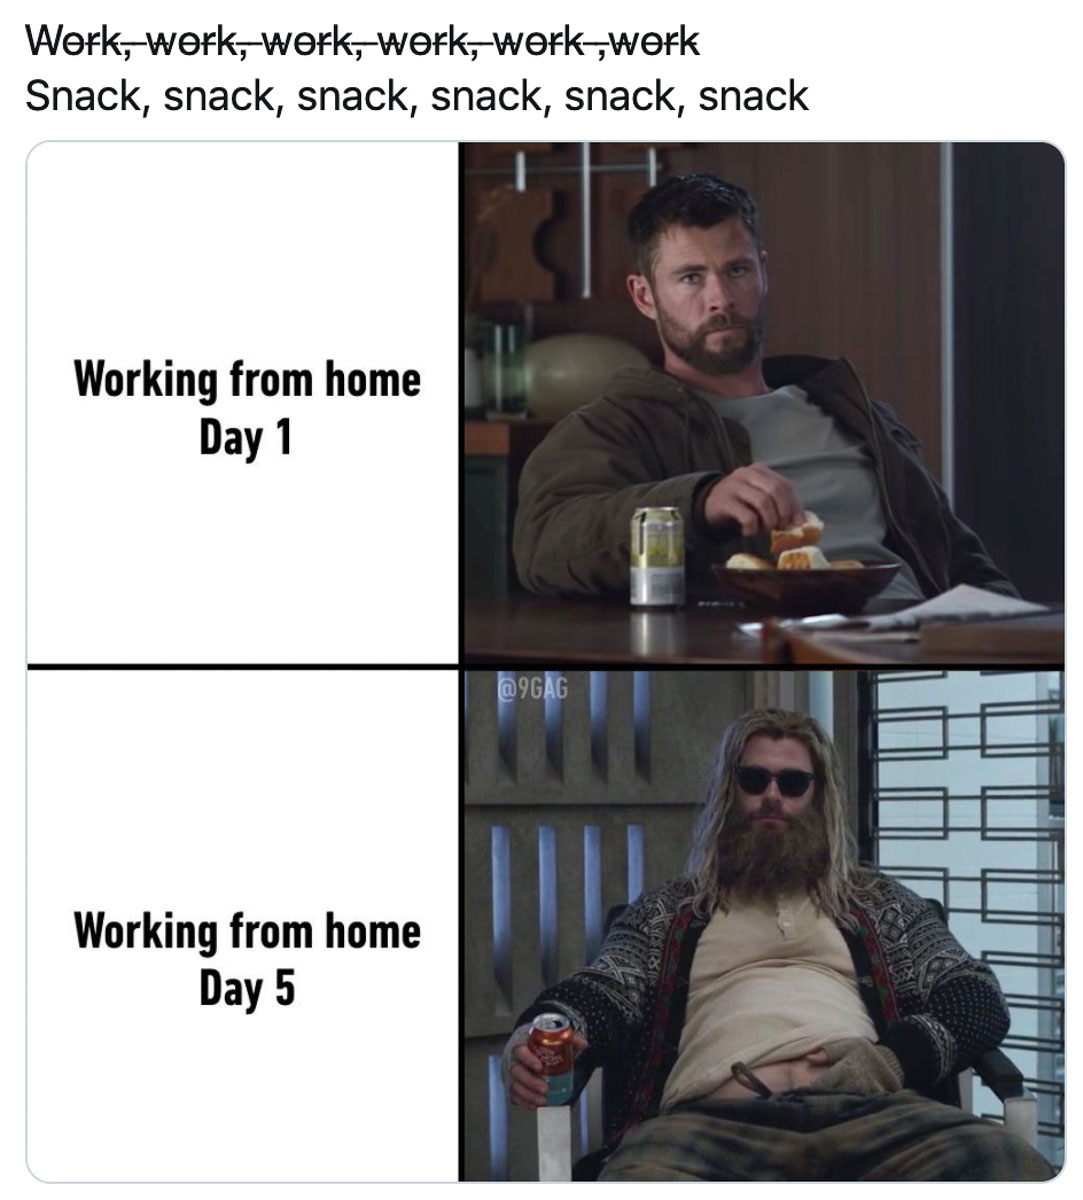 Nonstop WFH snacking - Working from home guide